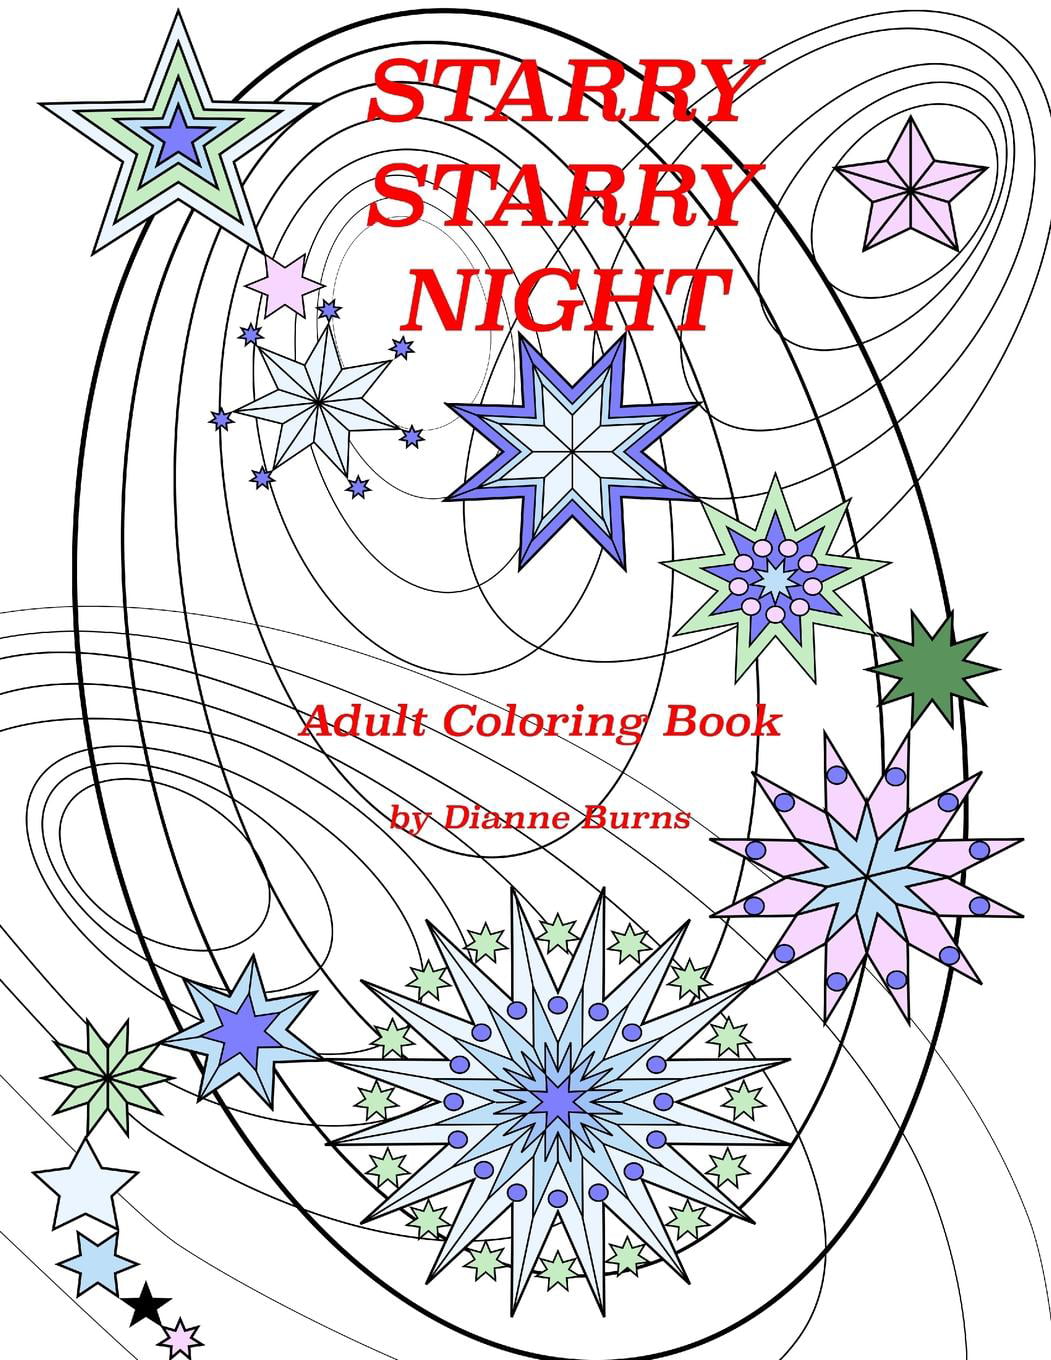 Starry Night Adult Coloring Book: Starry, Starry Night: Adult Coloring